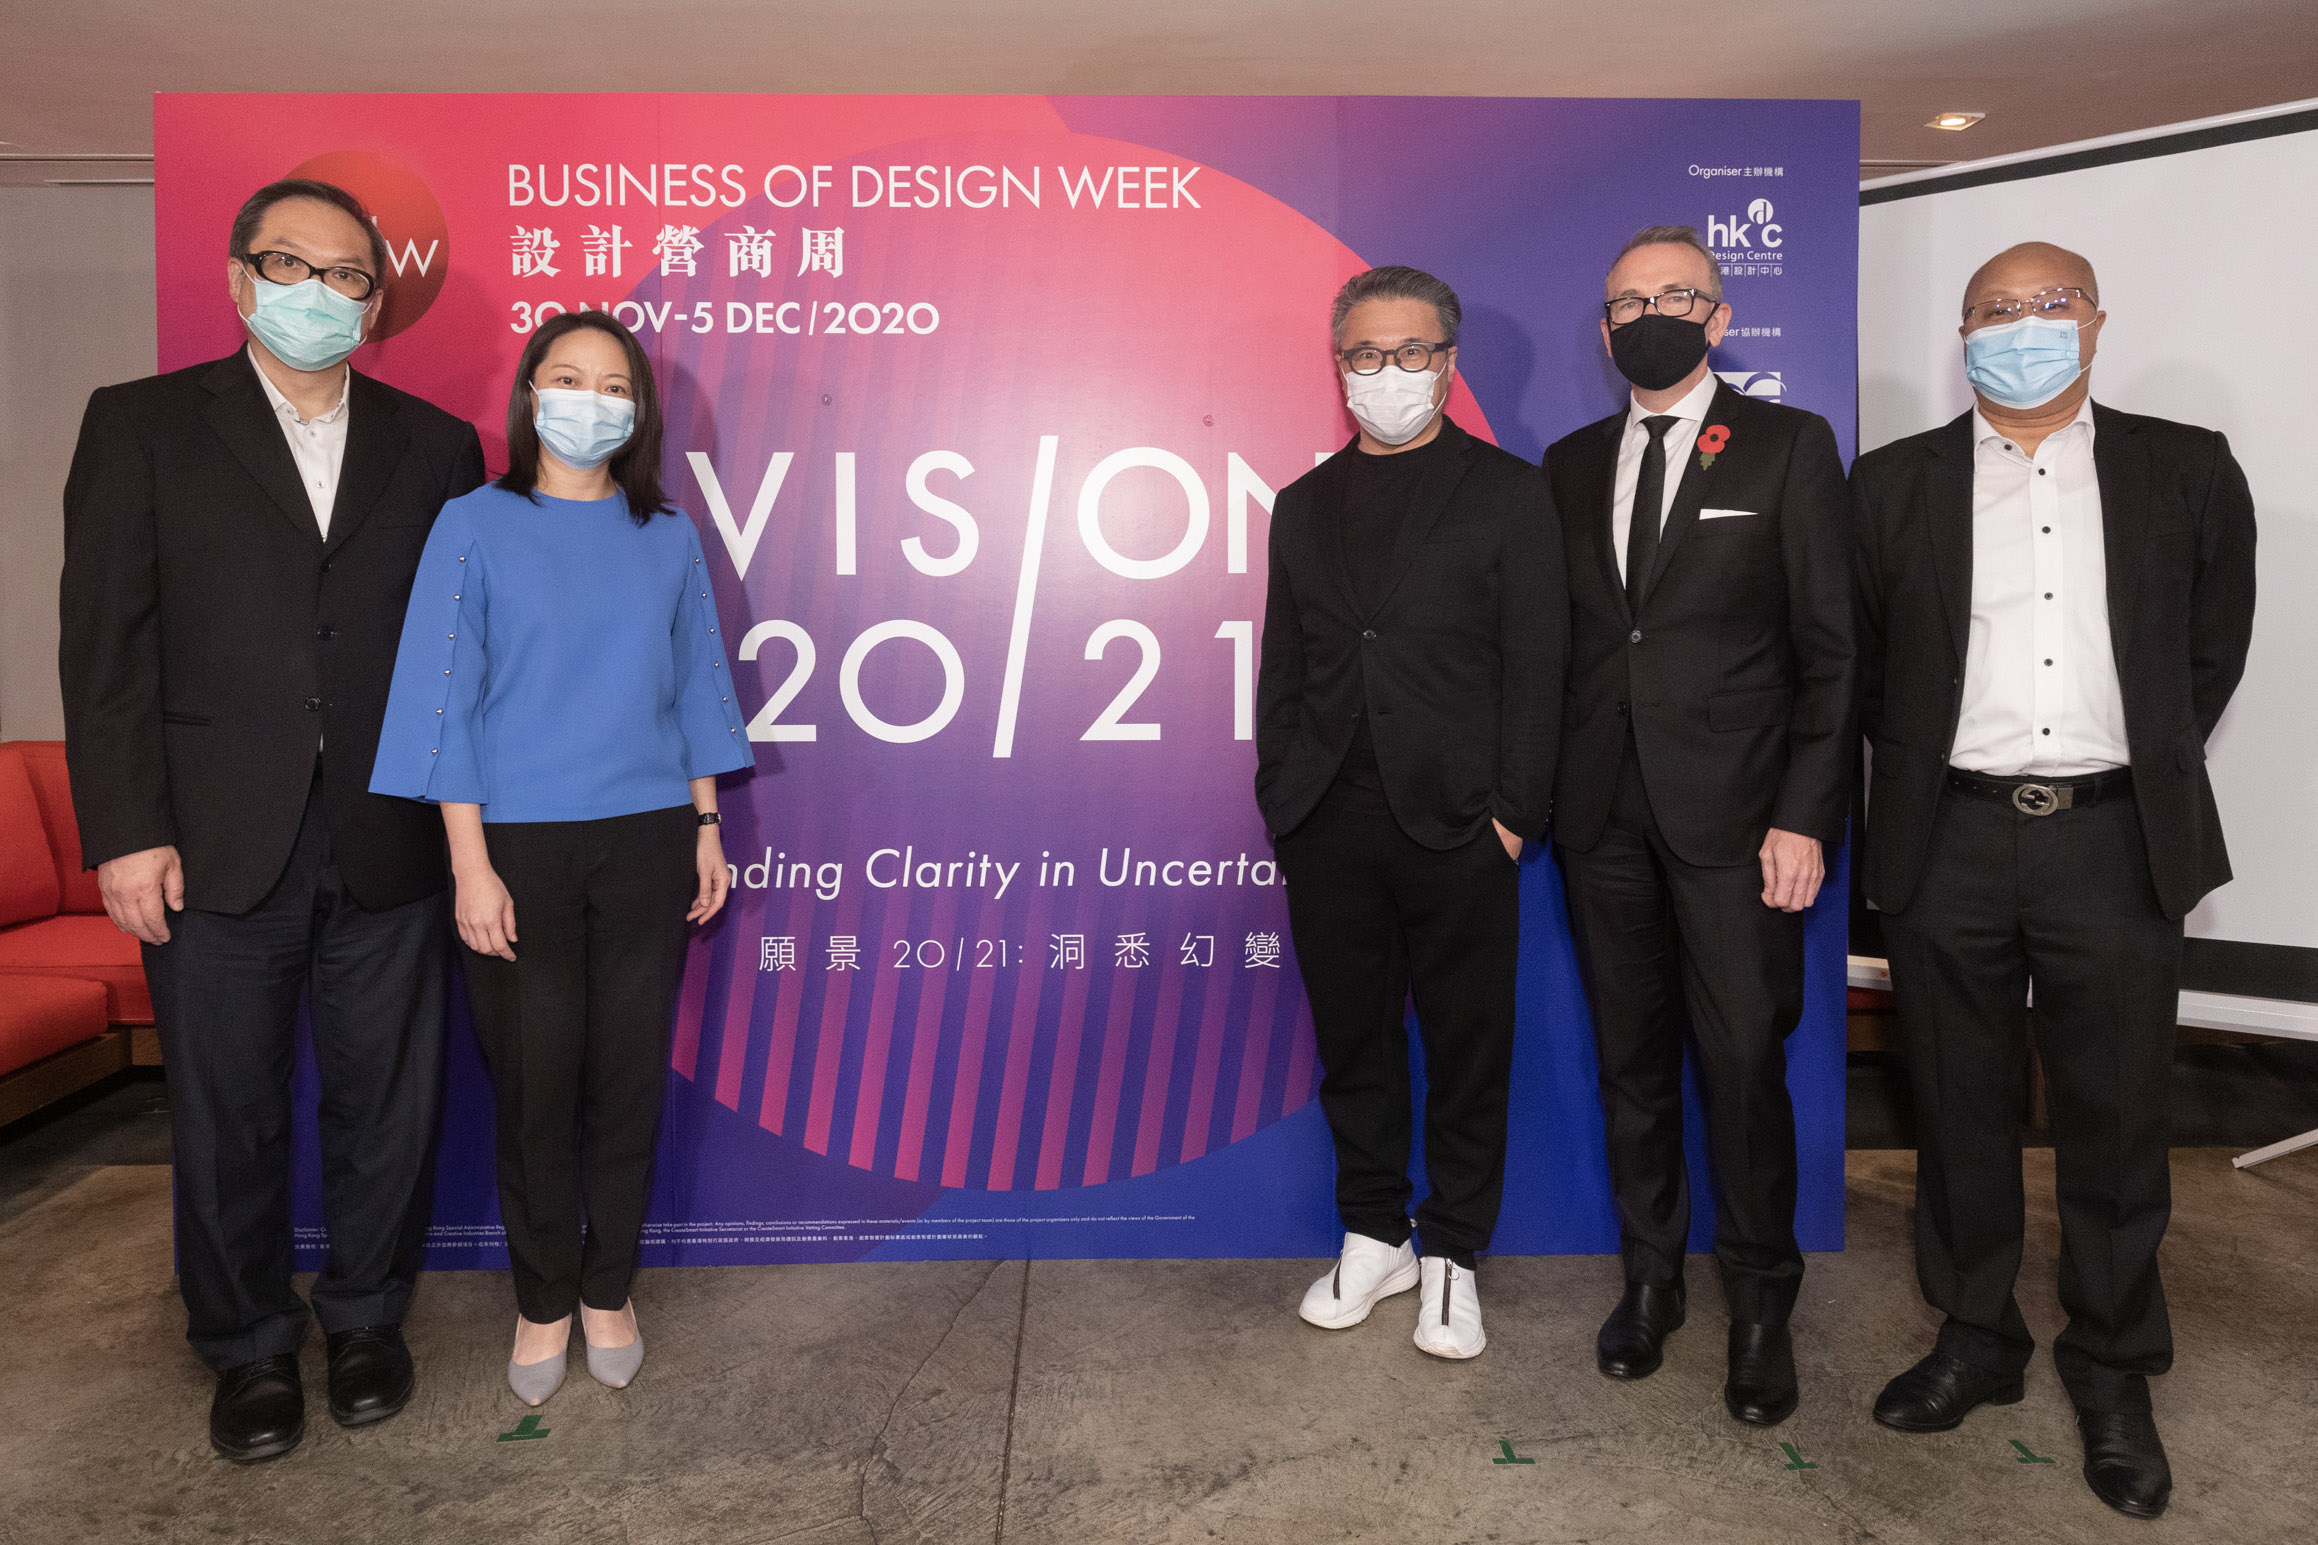 “VISION 20/21” – Finding Clarity in Uncertainty at Business of Design Week (BODW) 2020